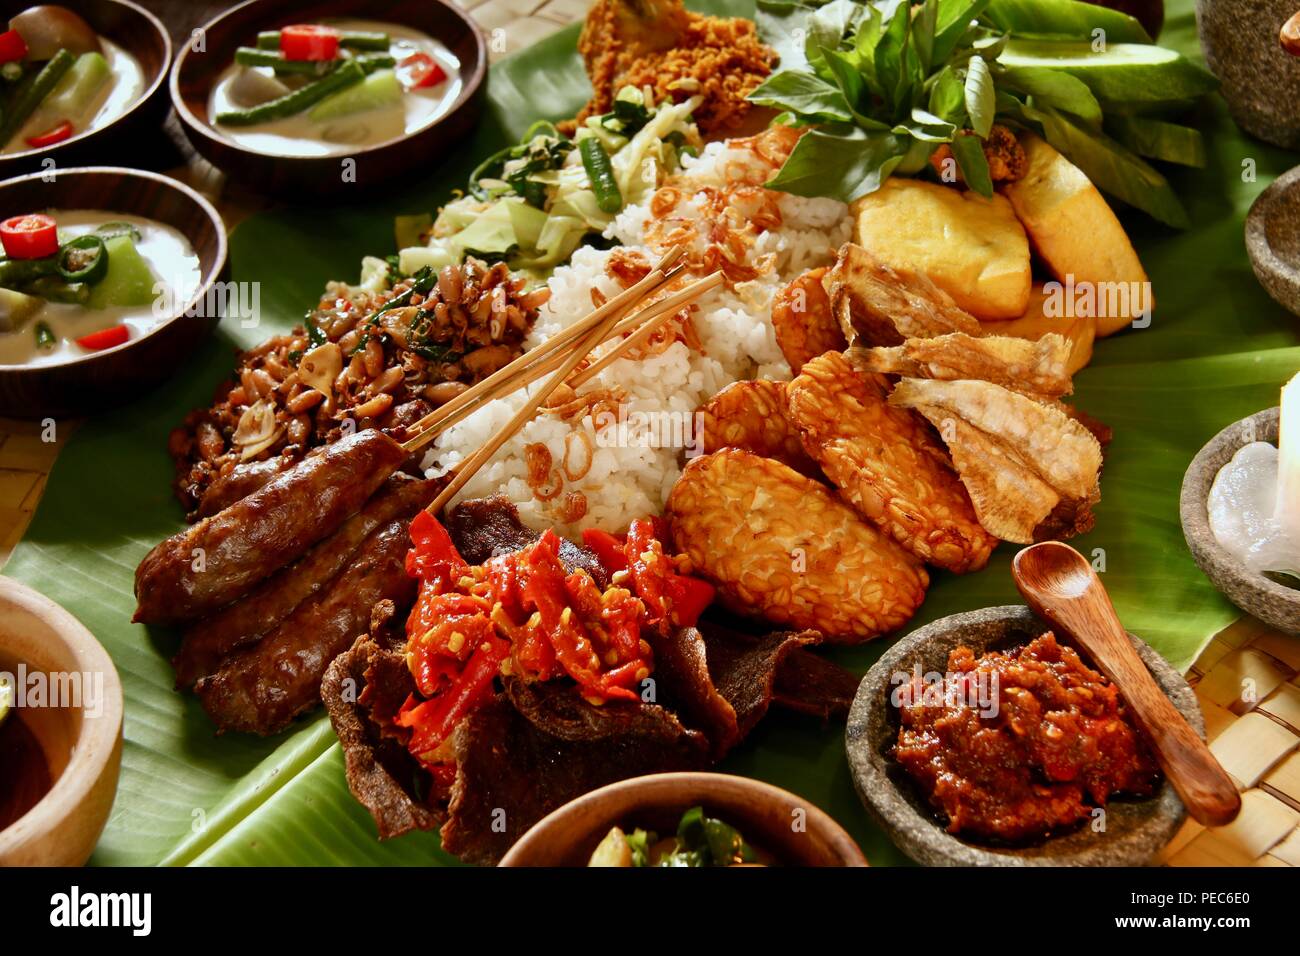 Indonesian Rijsttafel on Banana Leaf Rice with various dishes